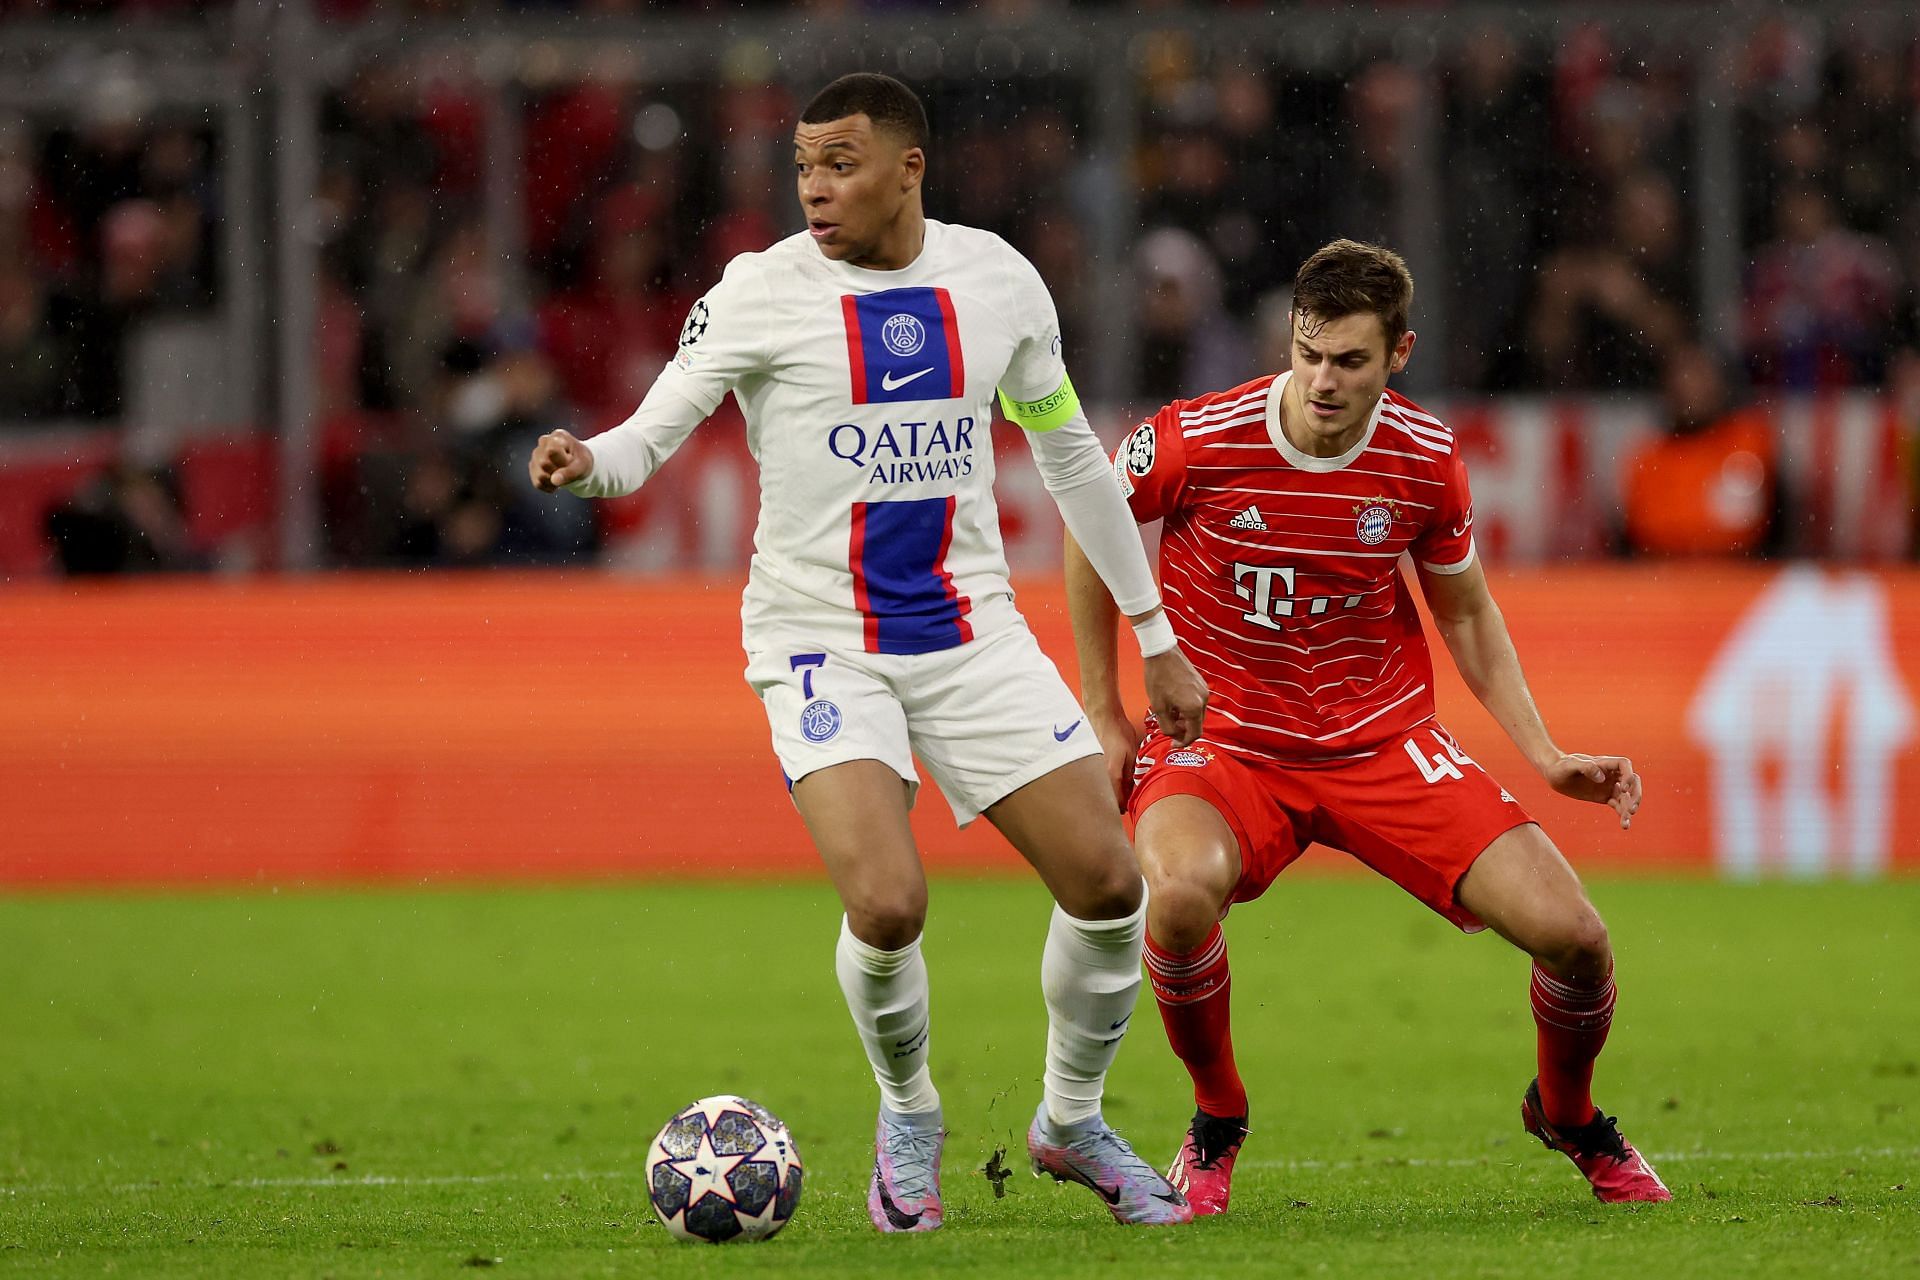 The Parisians were beaten 3-0 on aggregate by Bayern Munich in the Round of 16.